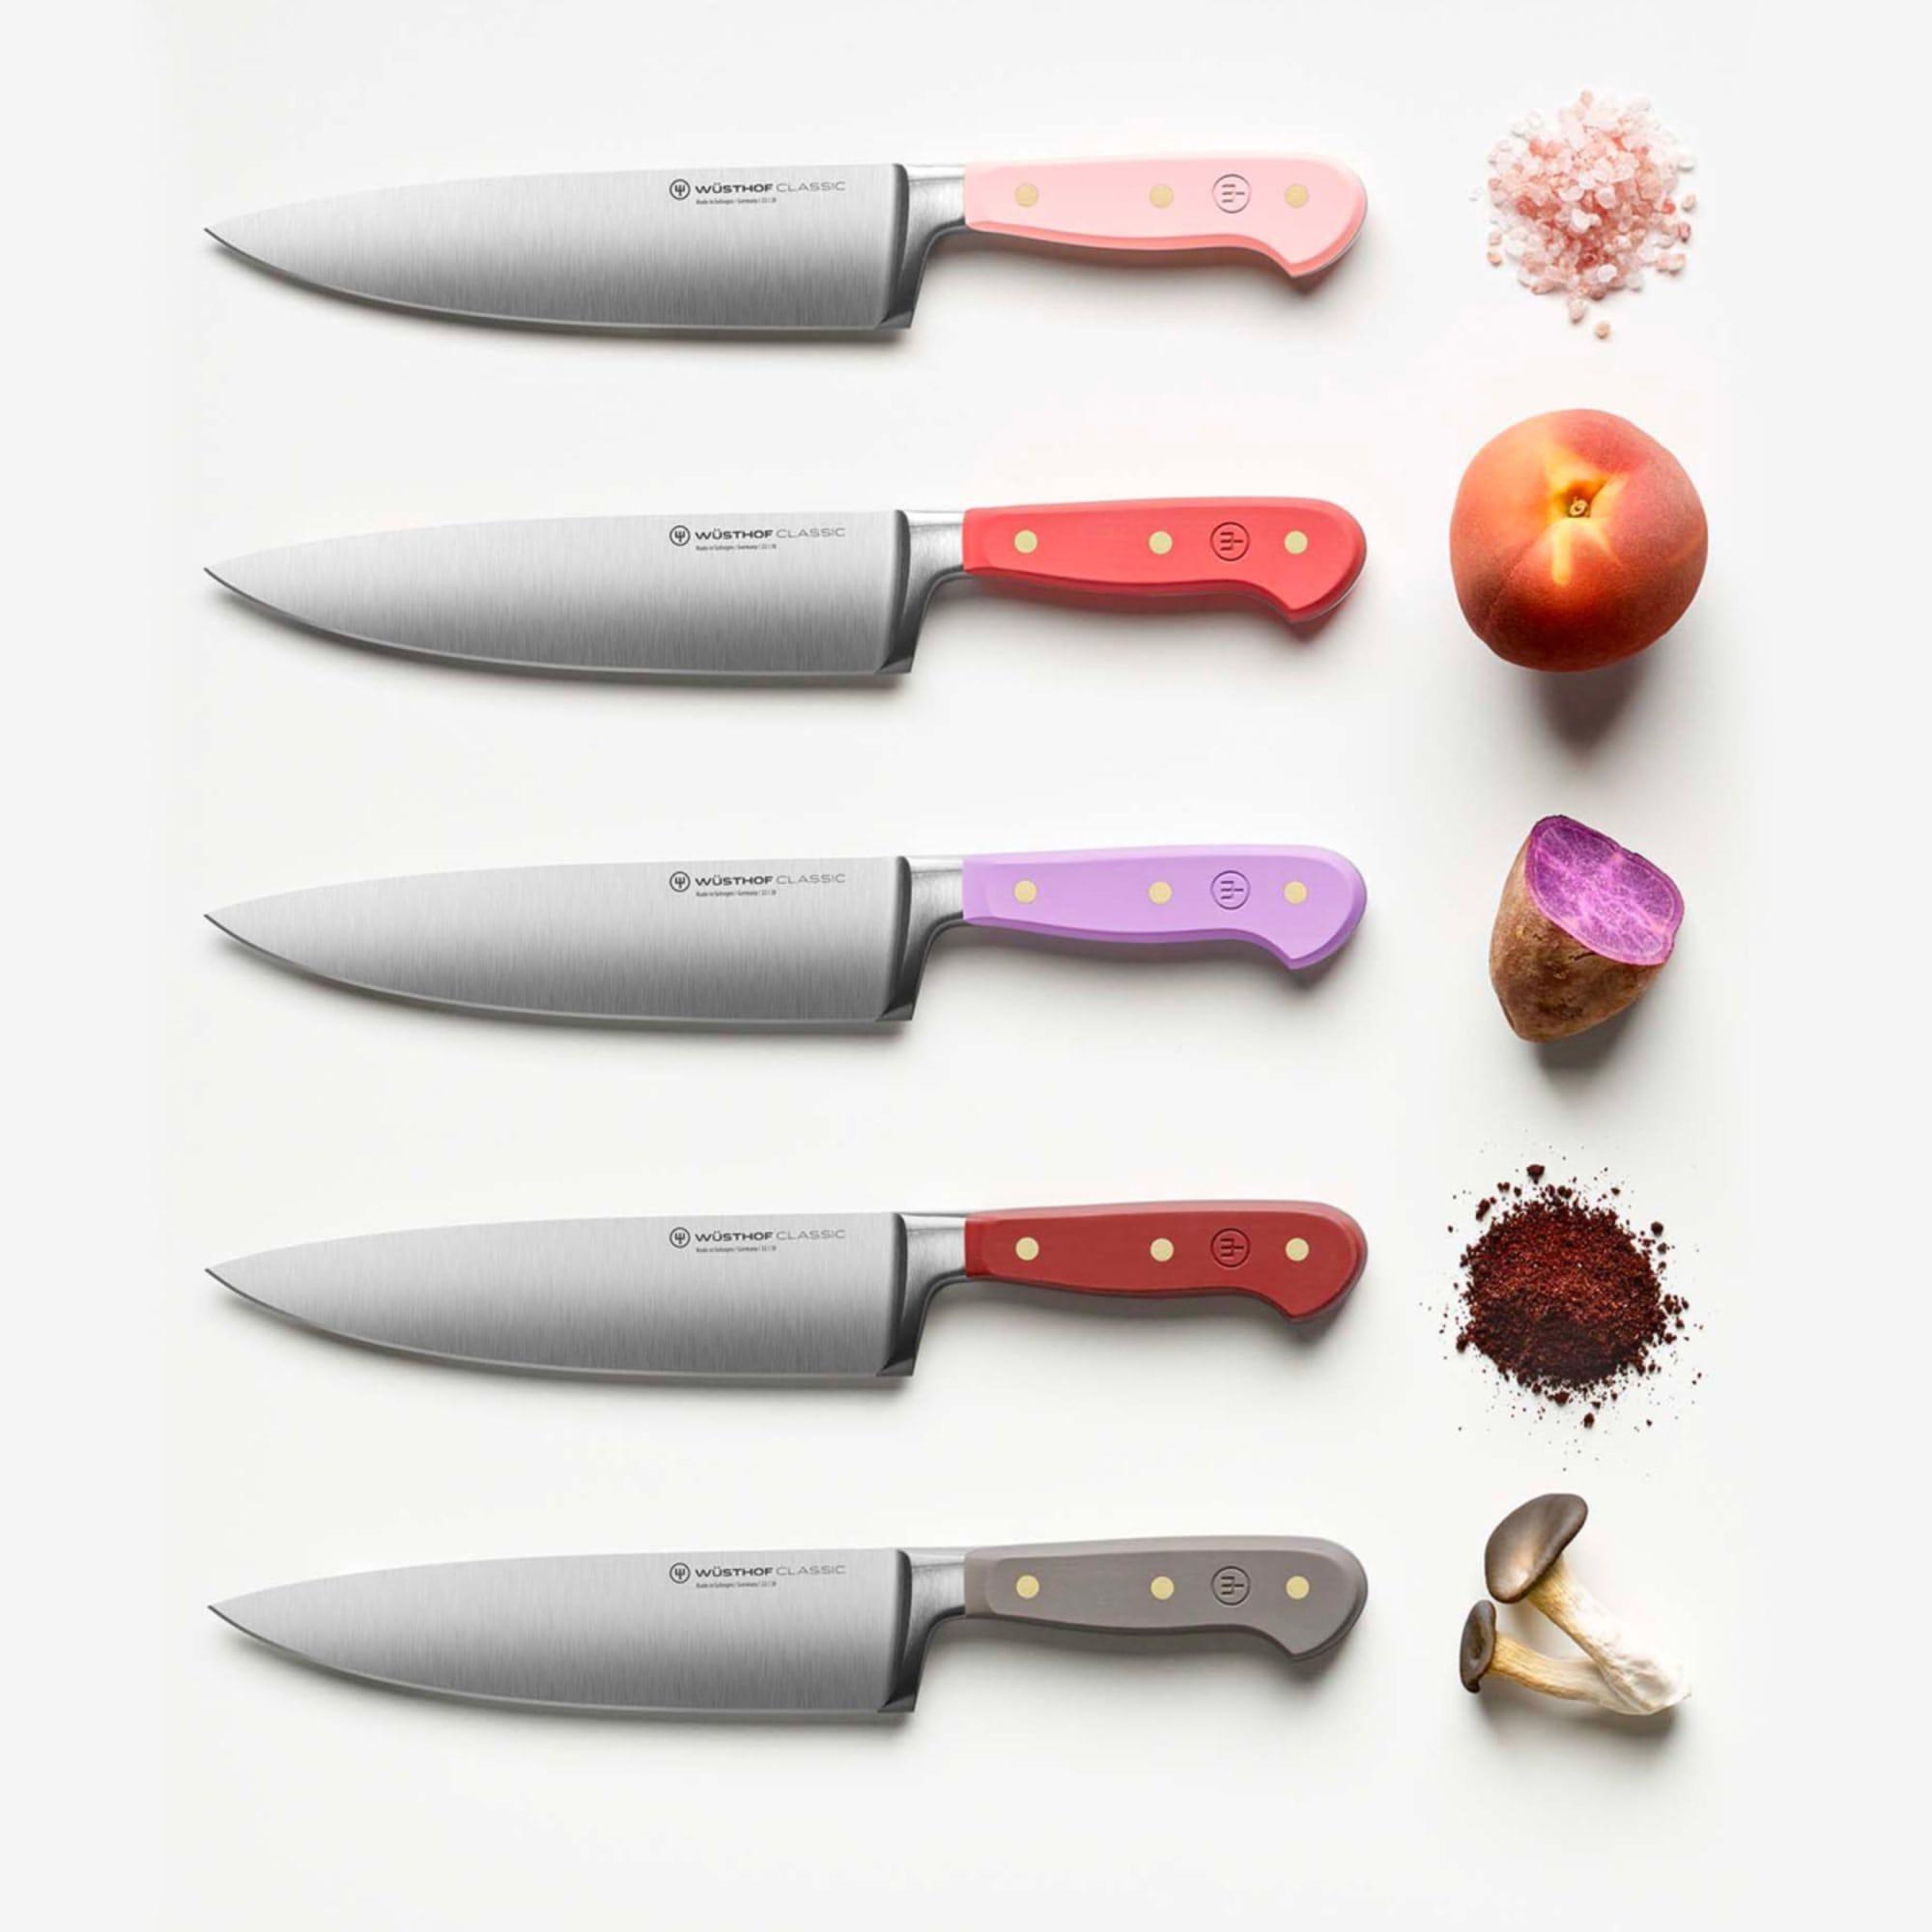 Wusthof Classic Colour Chef's Knife 20cm Coral Peach Image 5